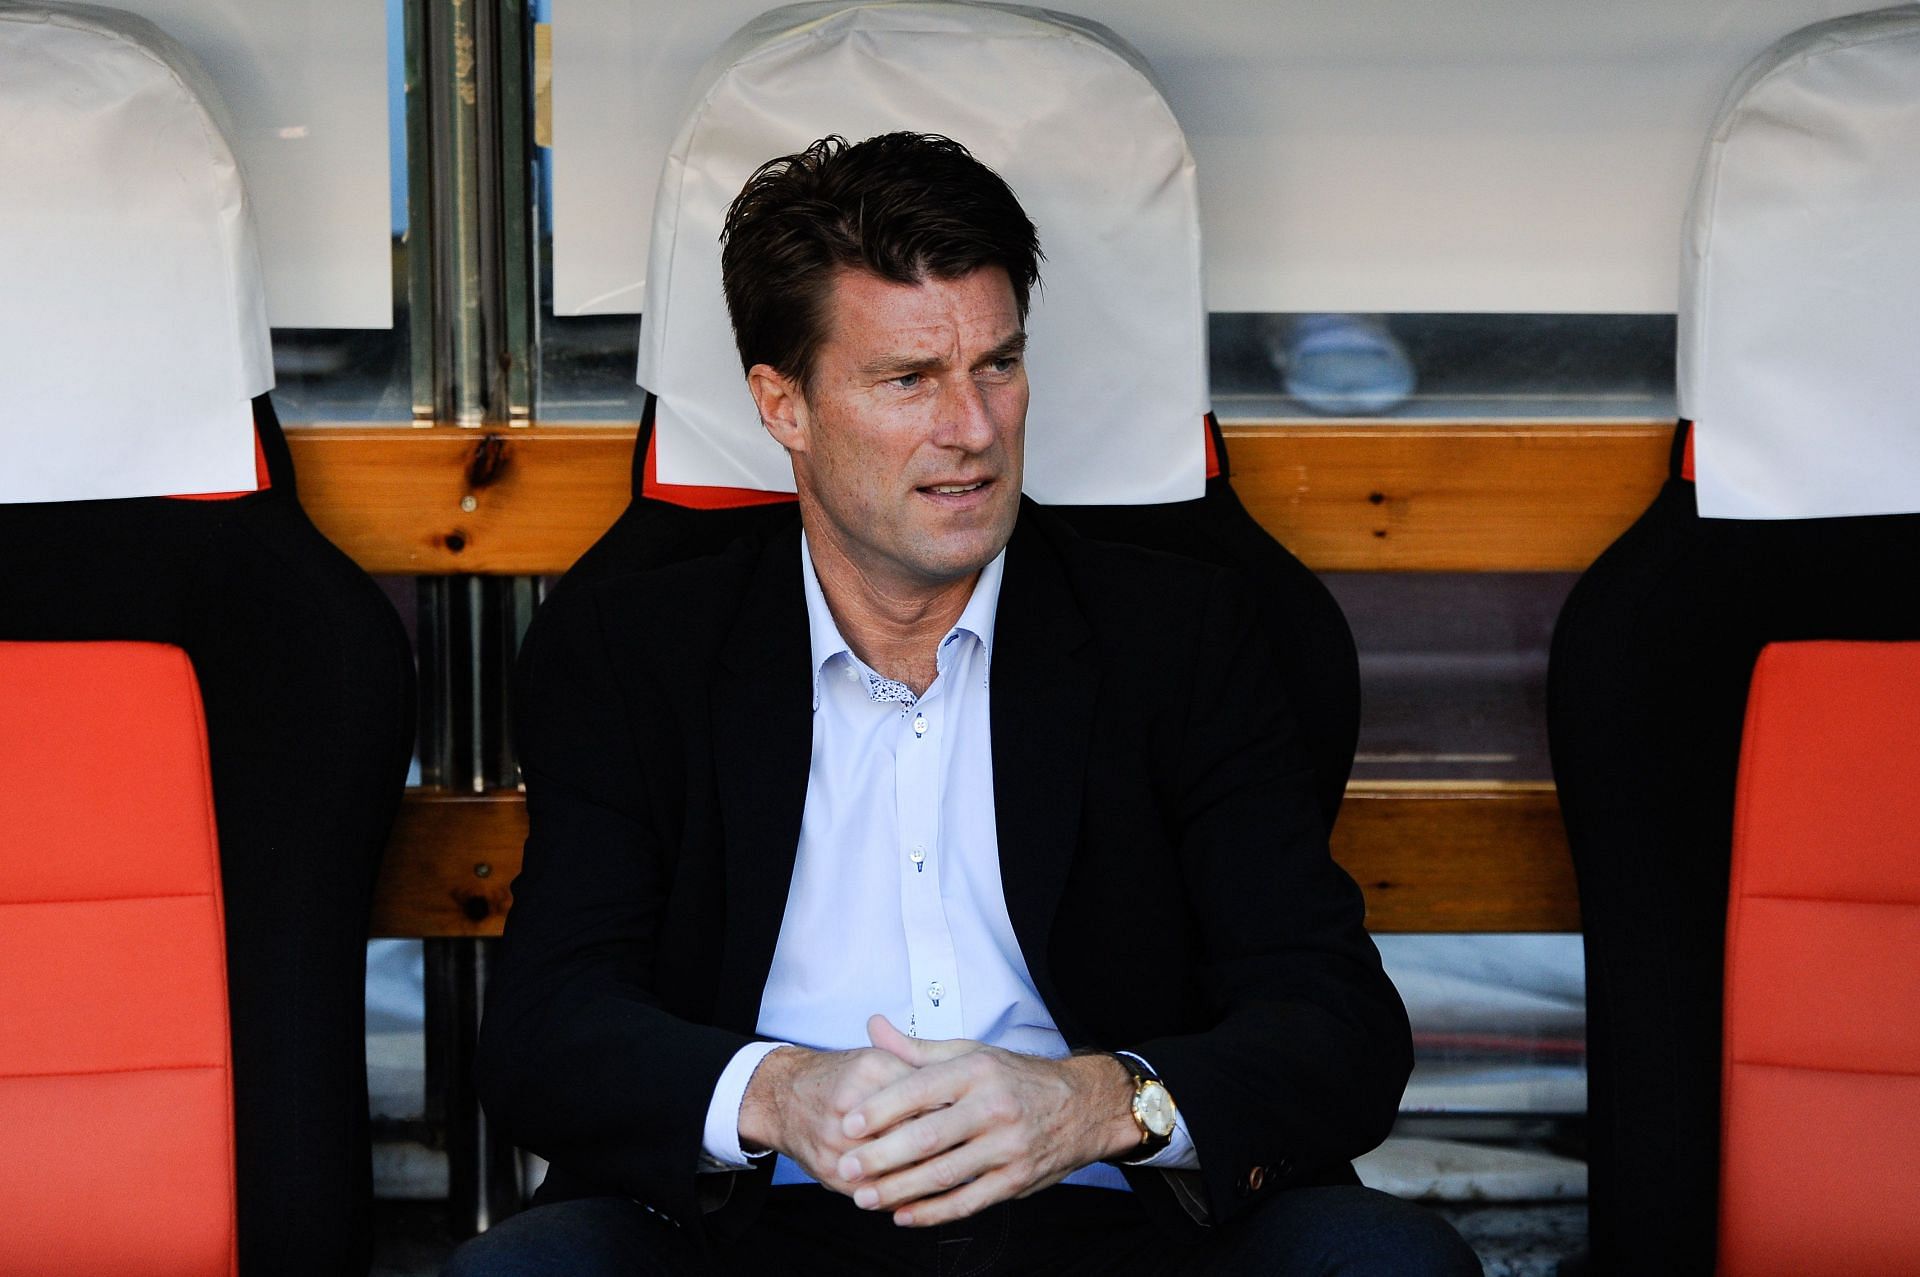 Laudrup was one of the finest two-footed players of his generation/